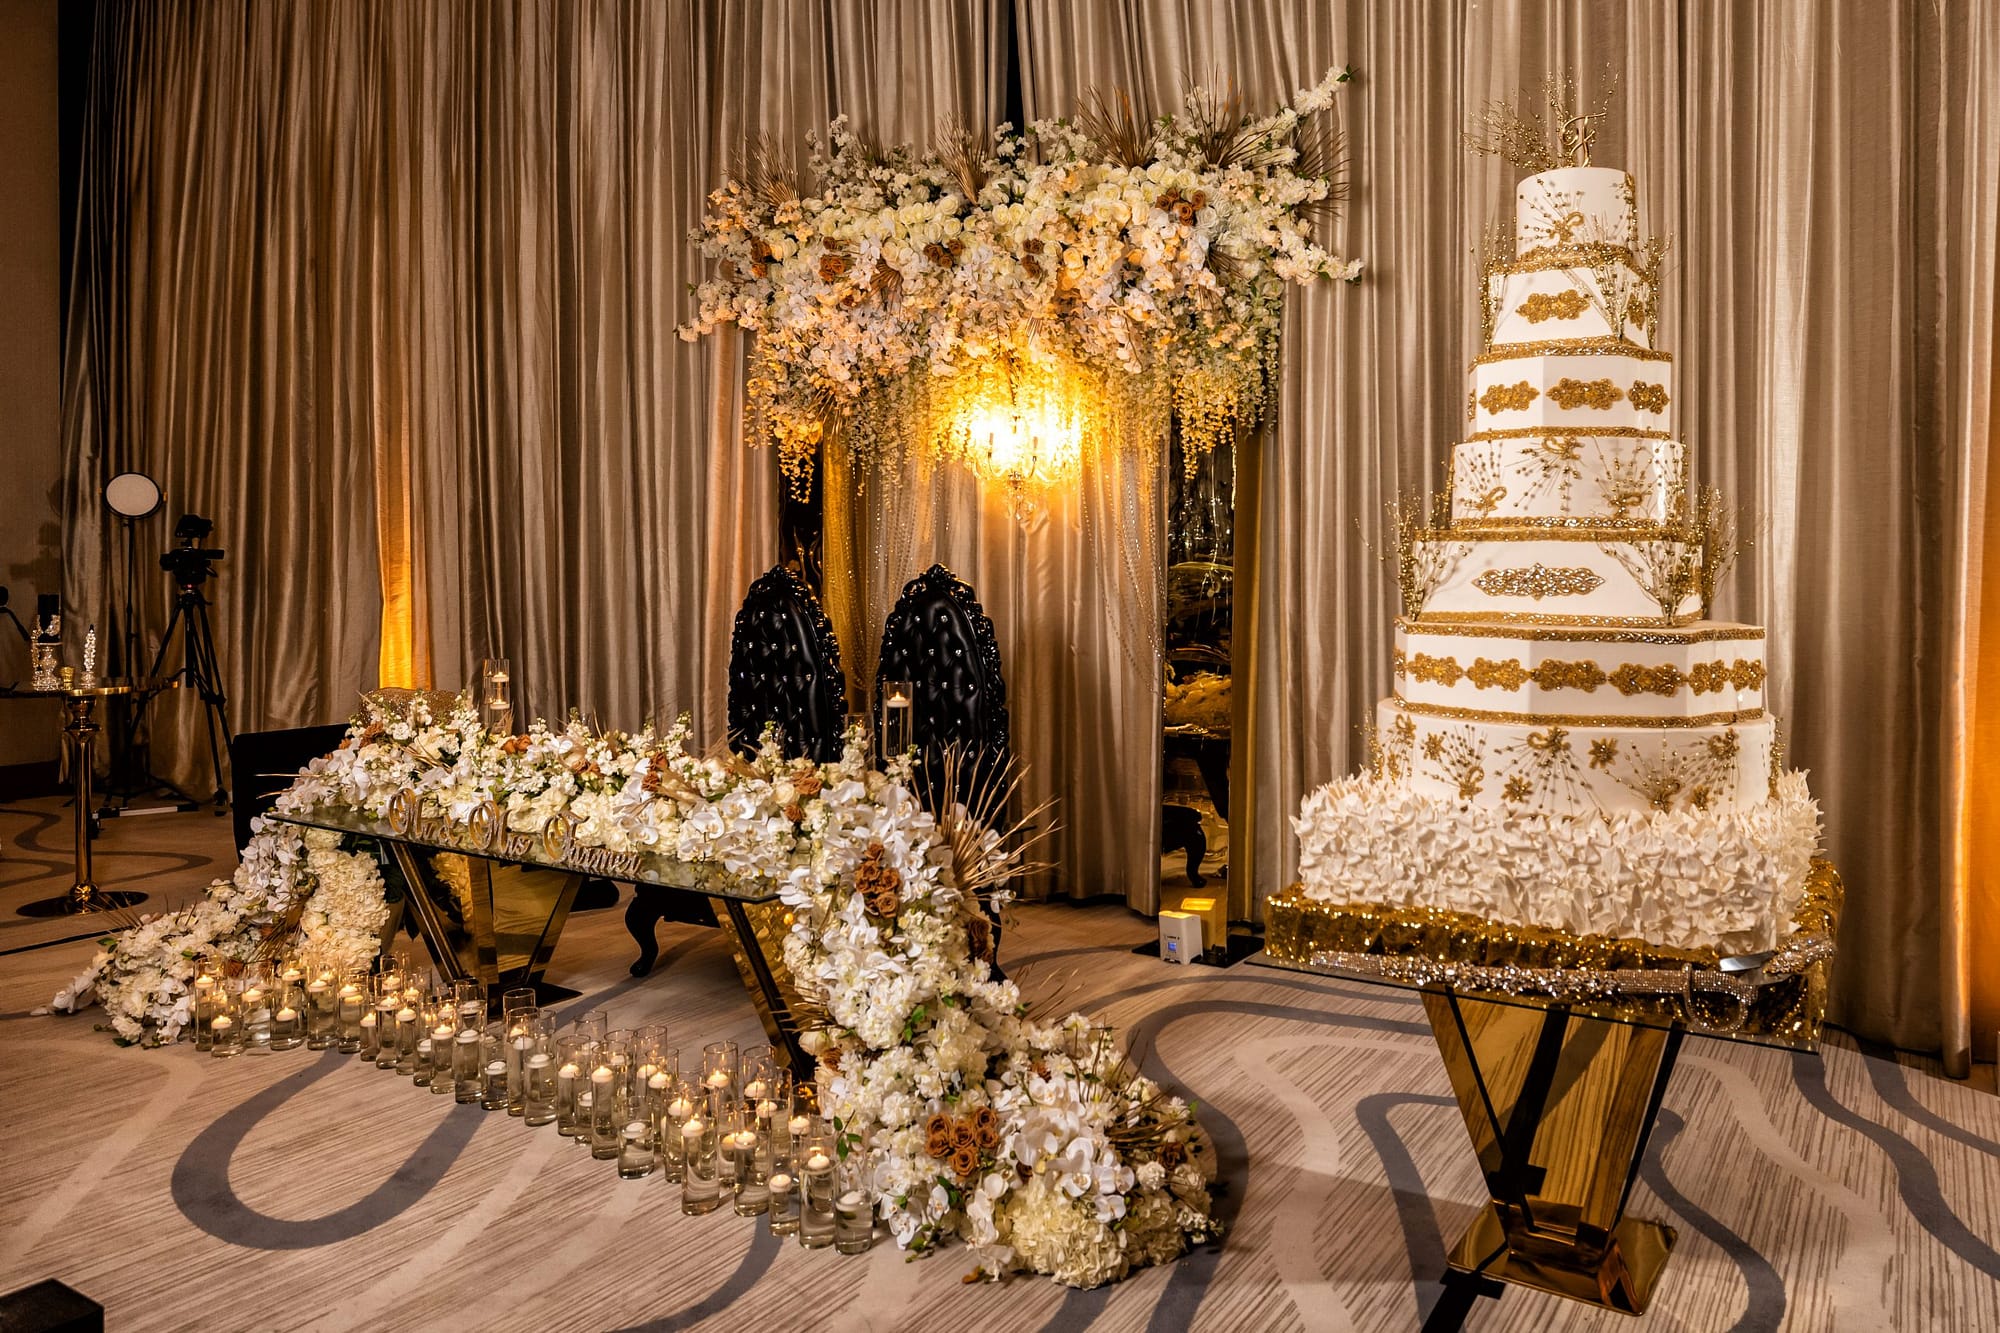 Gold and Black Exgtravegant Sweetheart Table with Six Tier Cake with Gold Detailing and White Florals